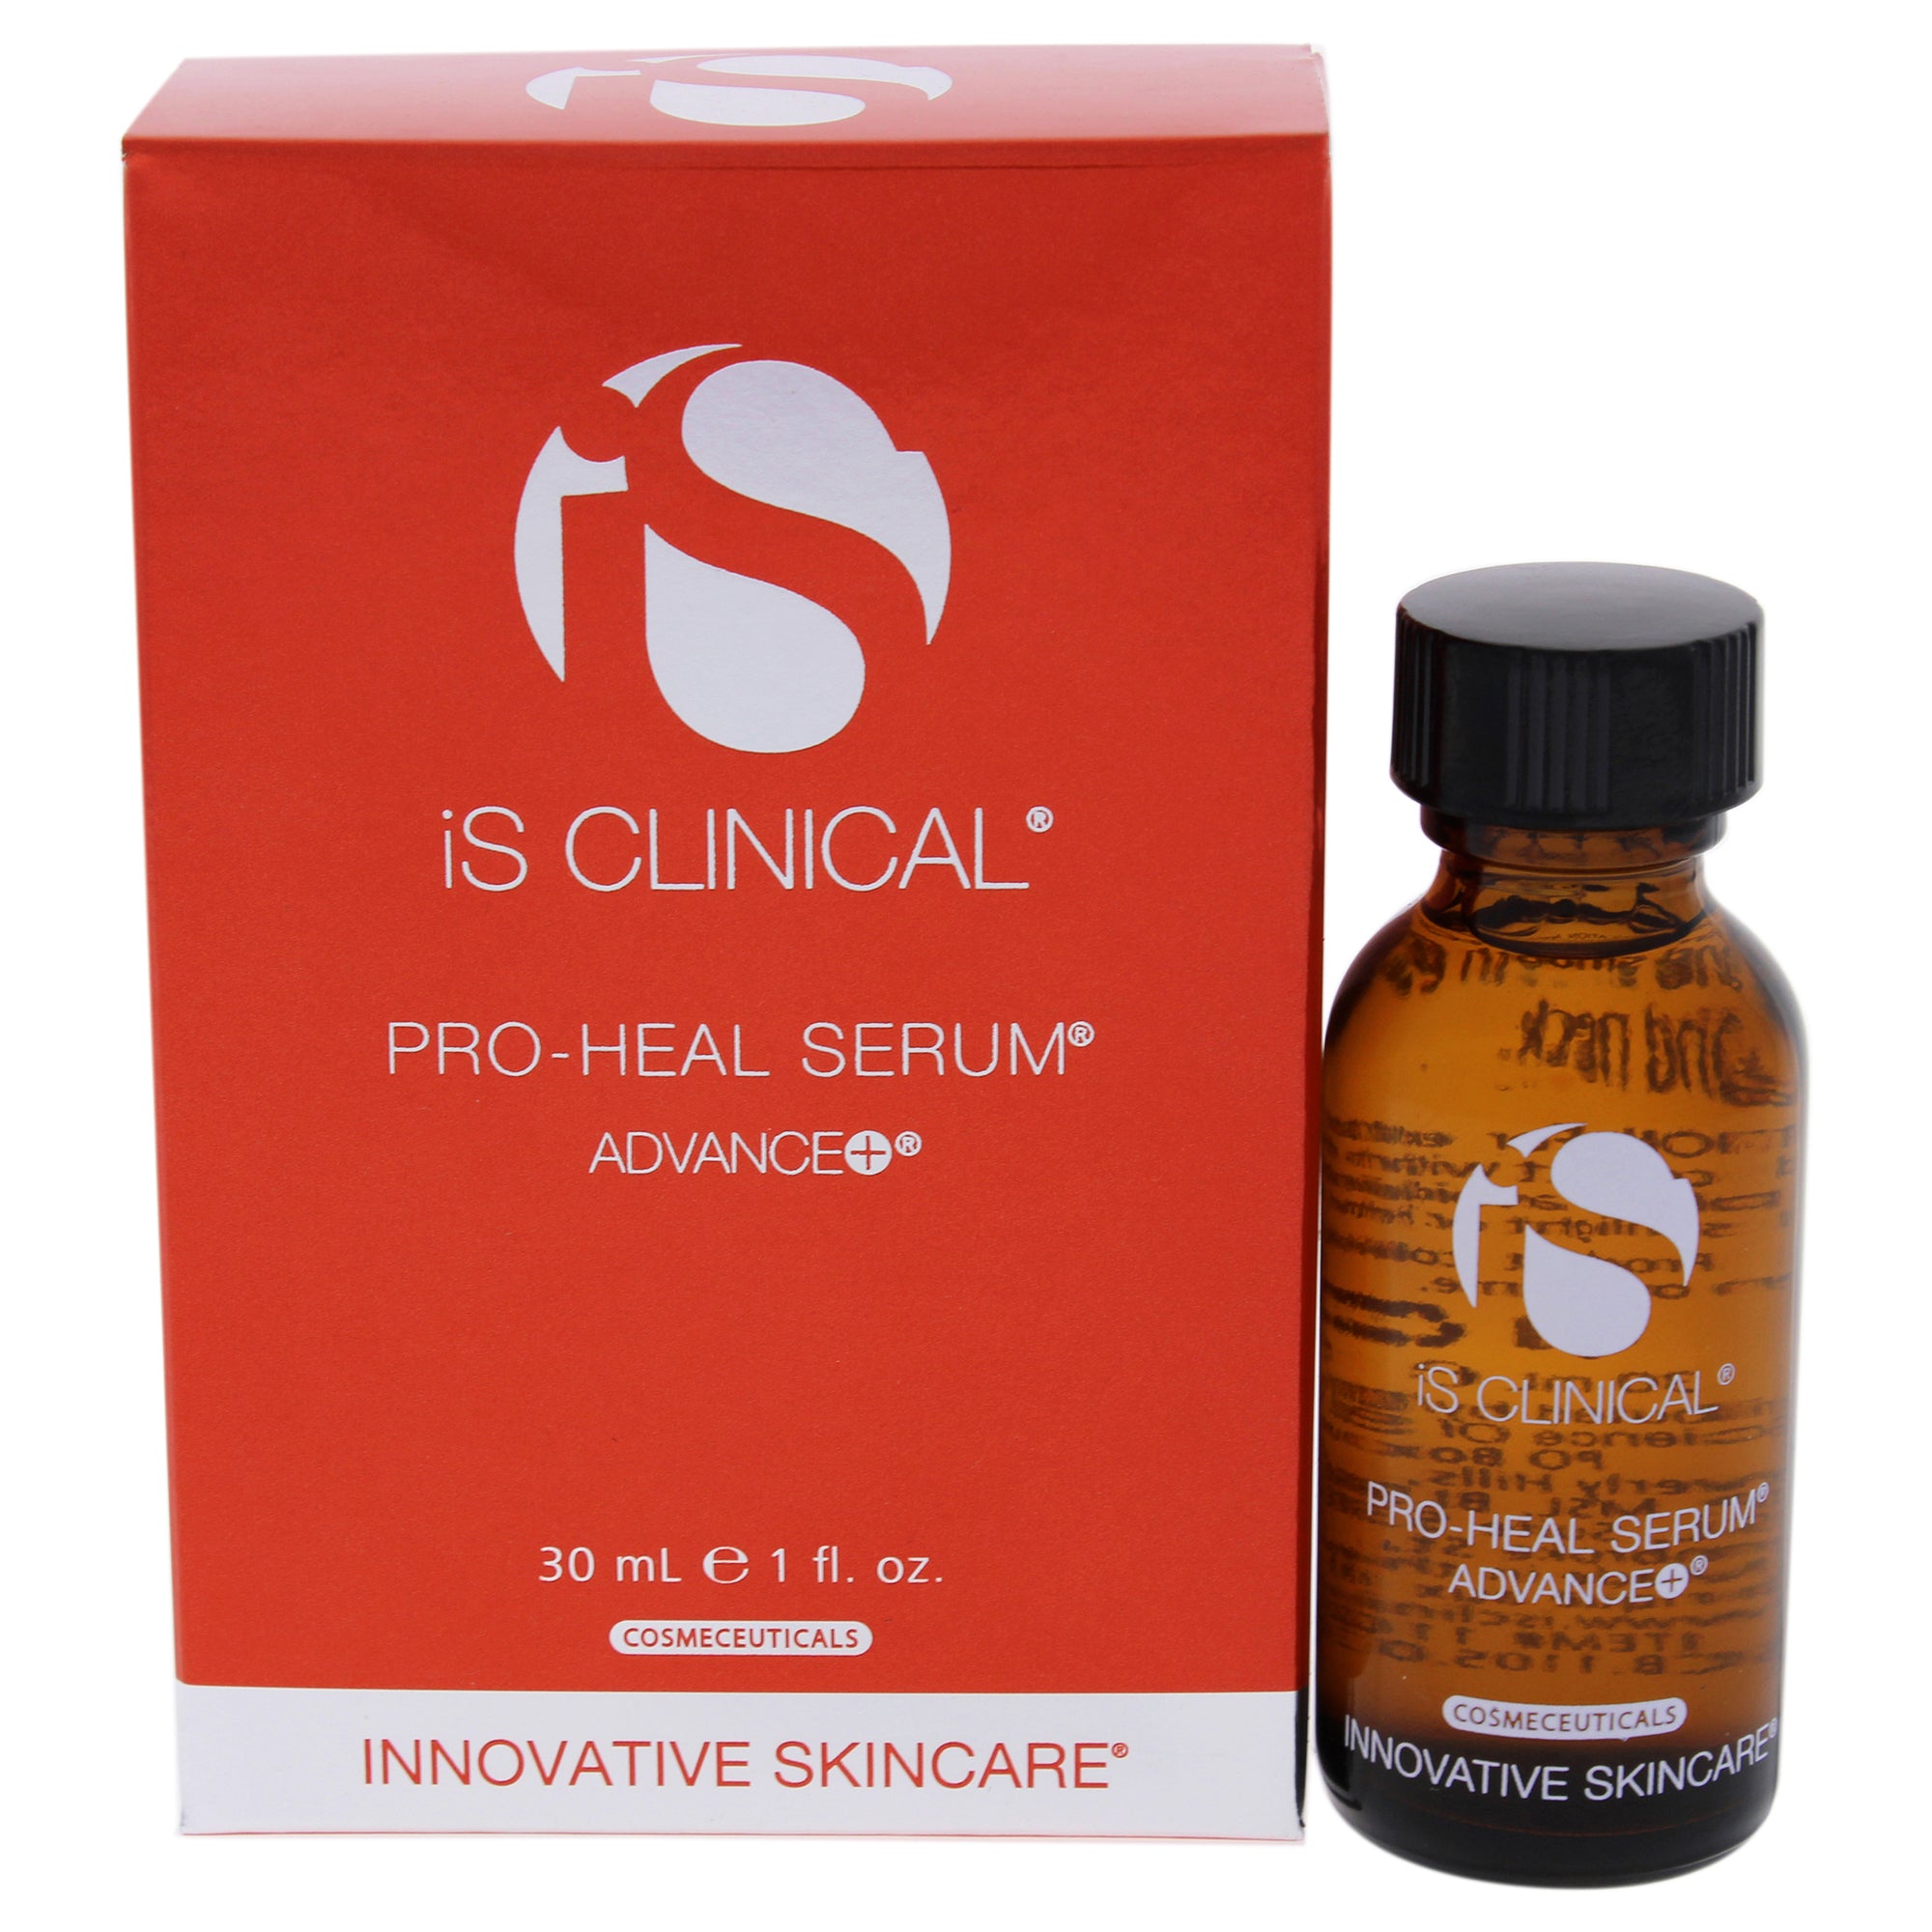 Pro-Heal Serum Advance Plus by iS Clinical for Unisex - 1 oz Serum